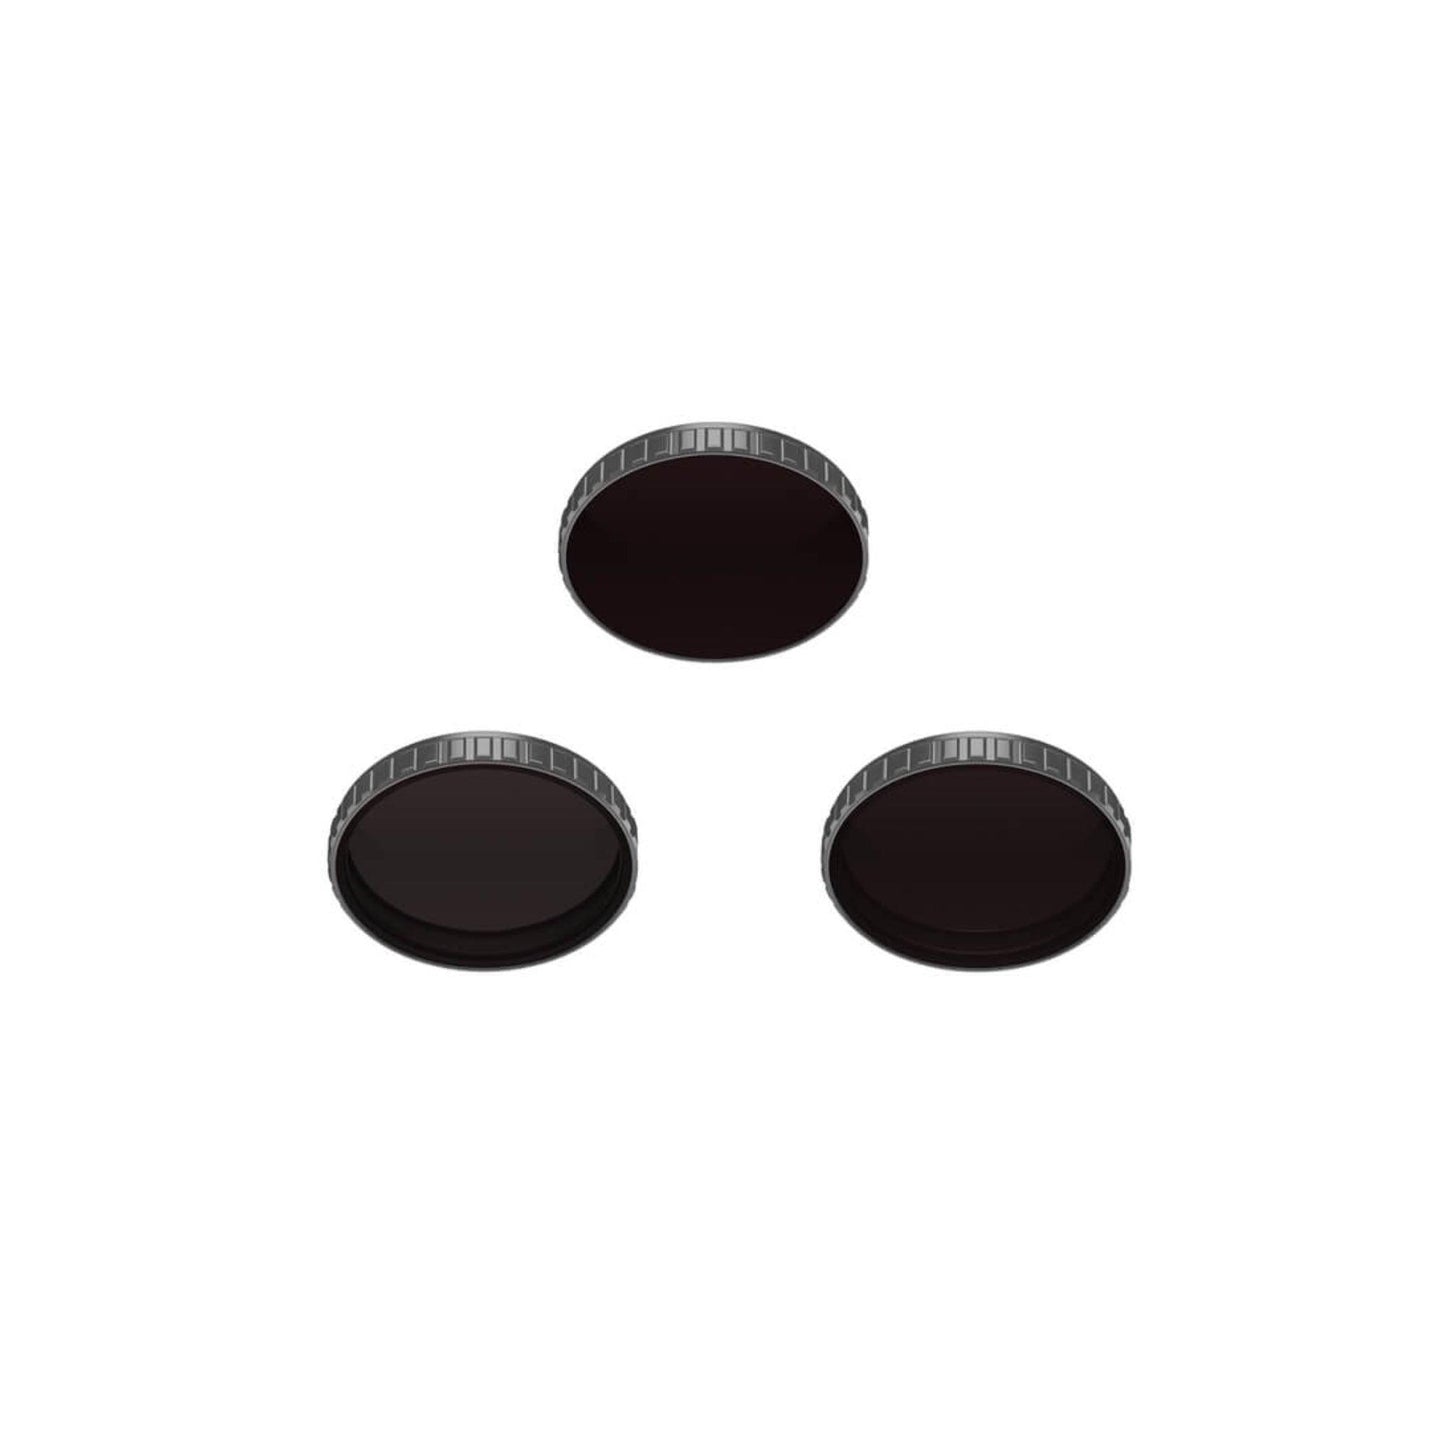 Osmo Action ND Filters Set - Silverlight Optics